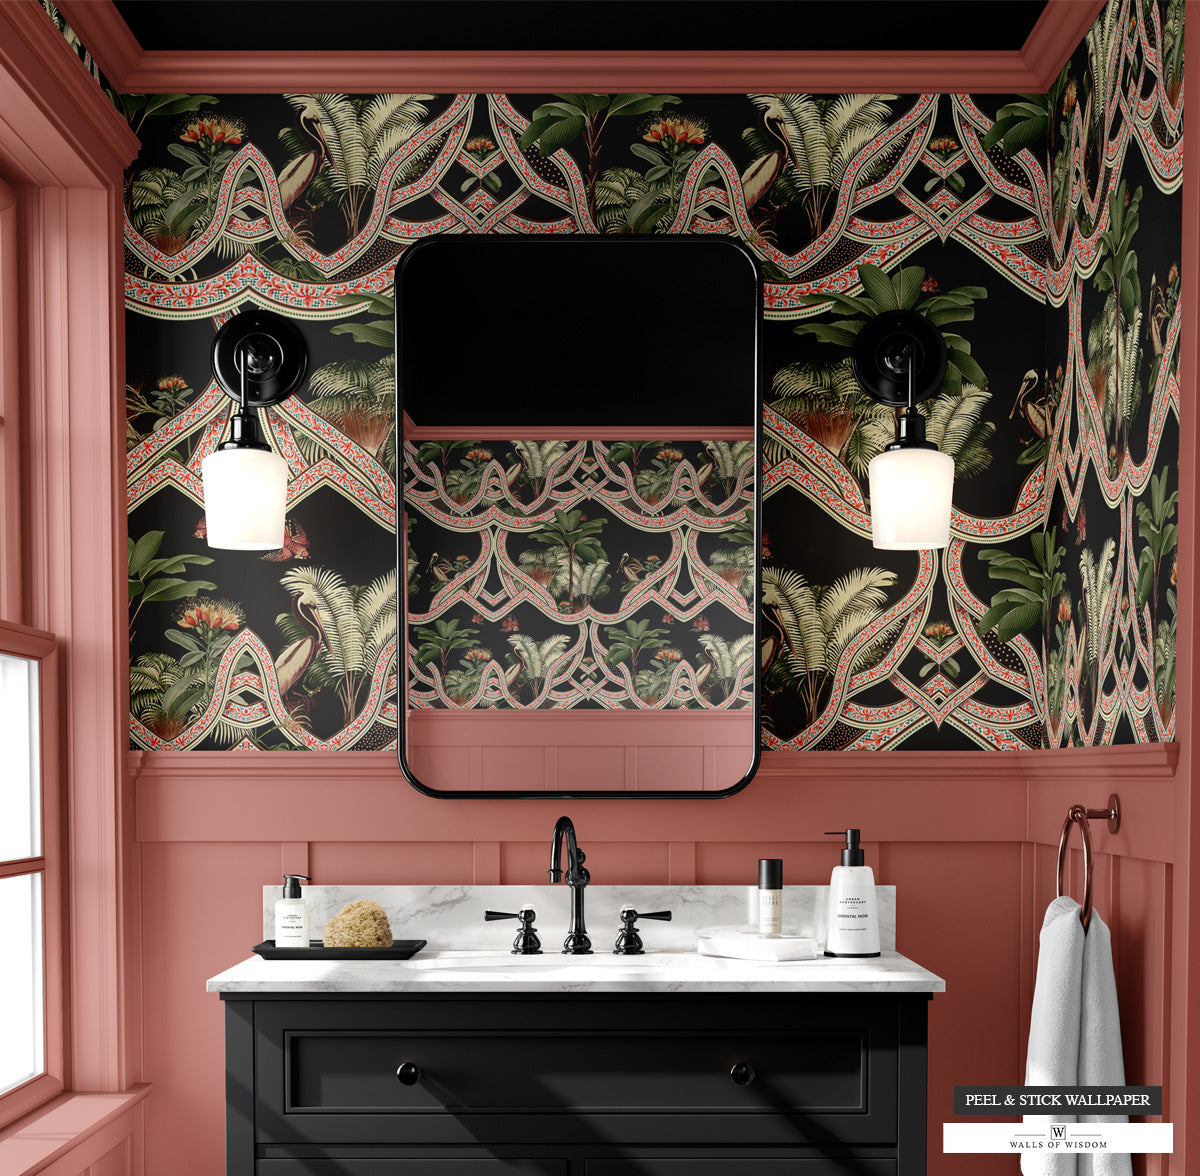 Luxurious and bold Havana Night Wallpaper, perfect for transforming any room with a tropical art deco flair.